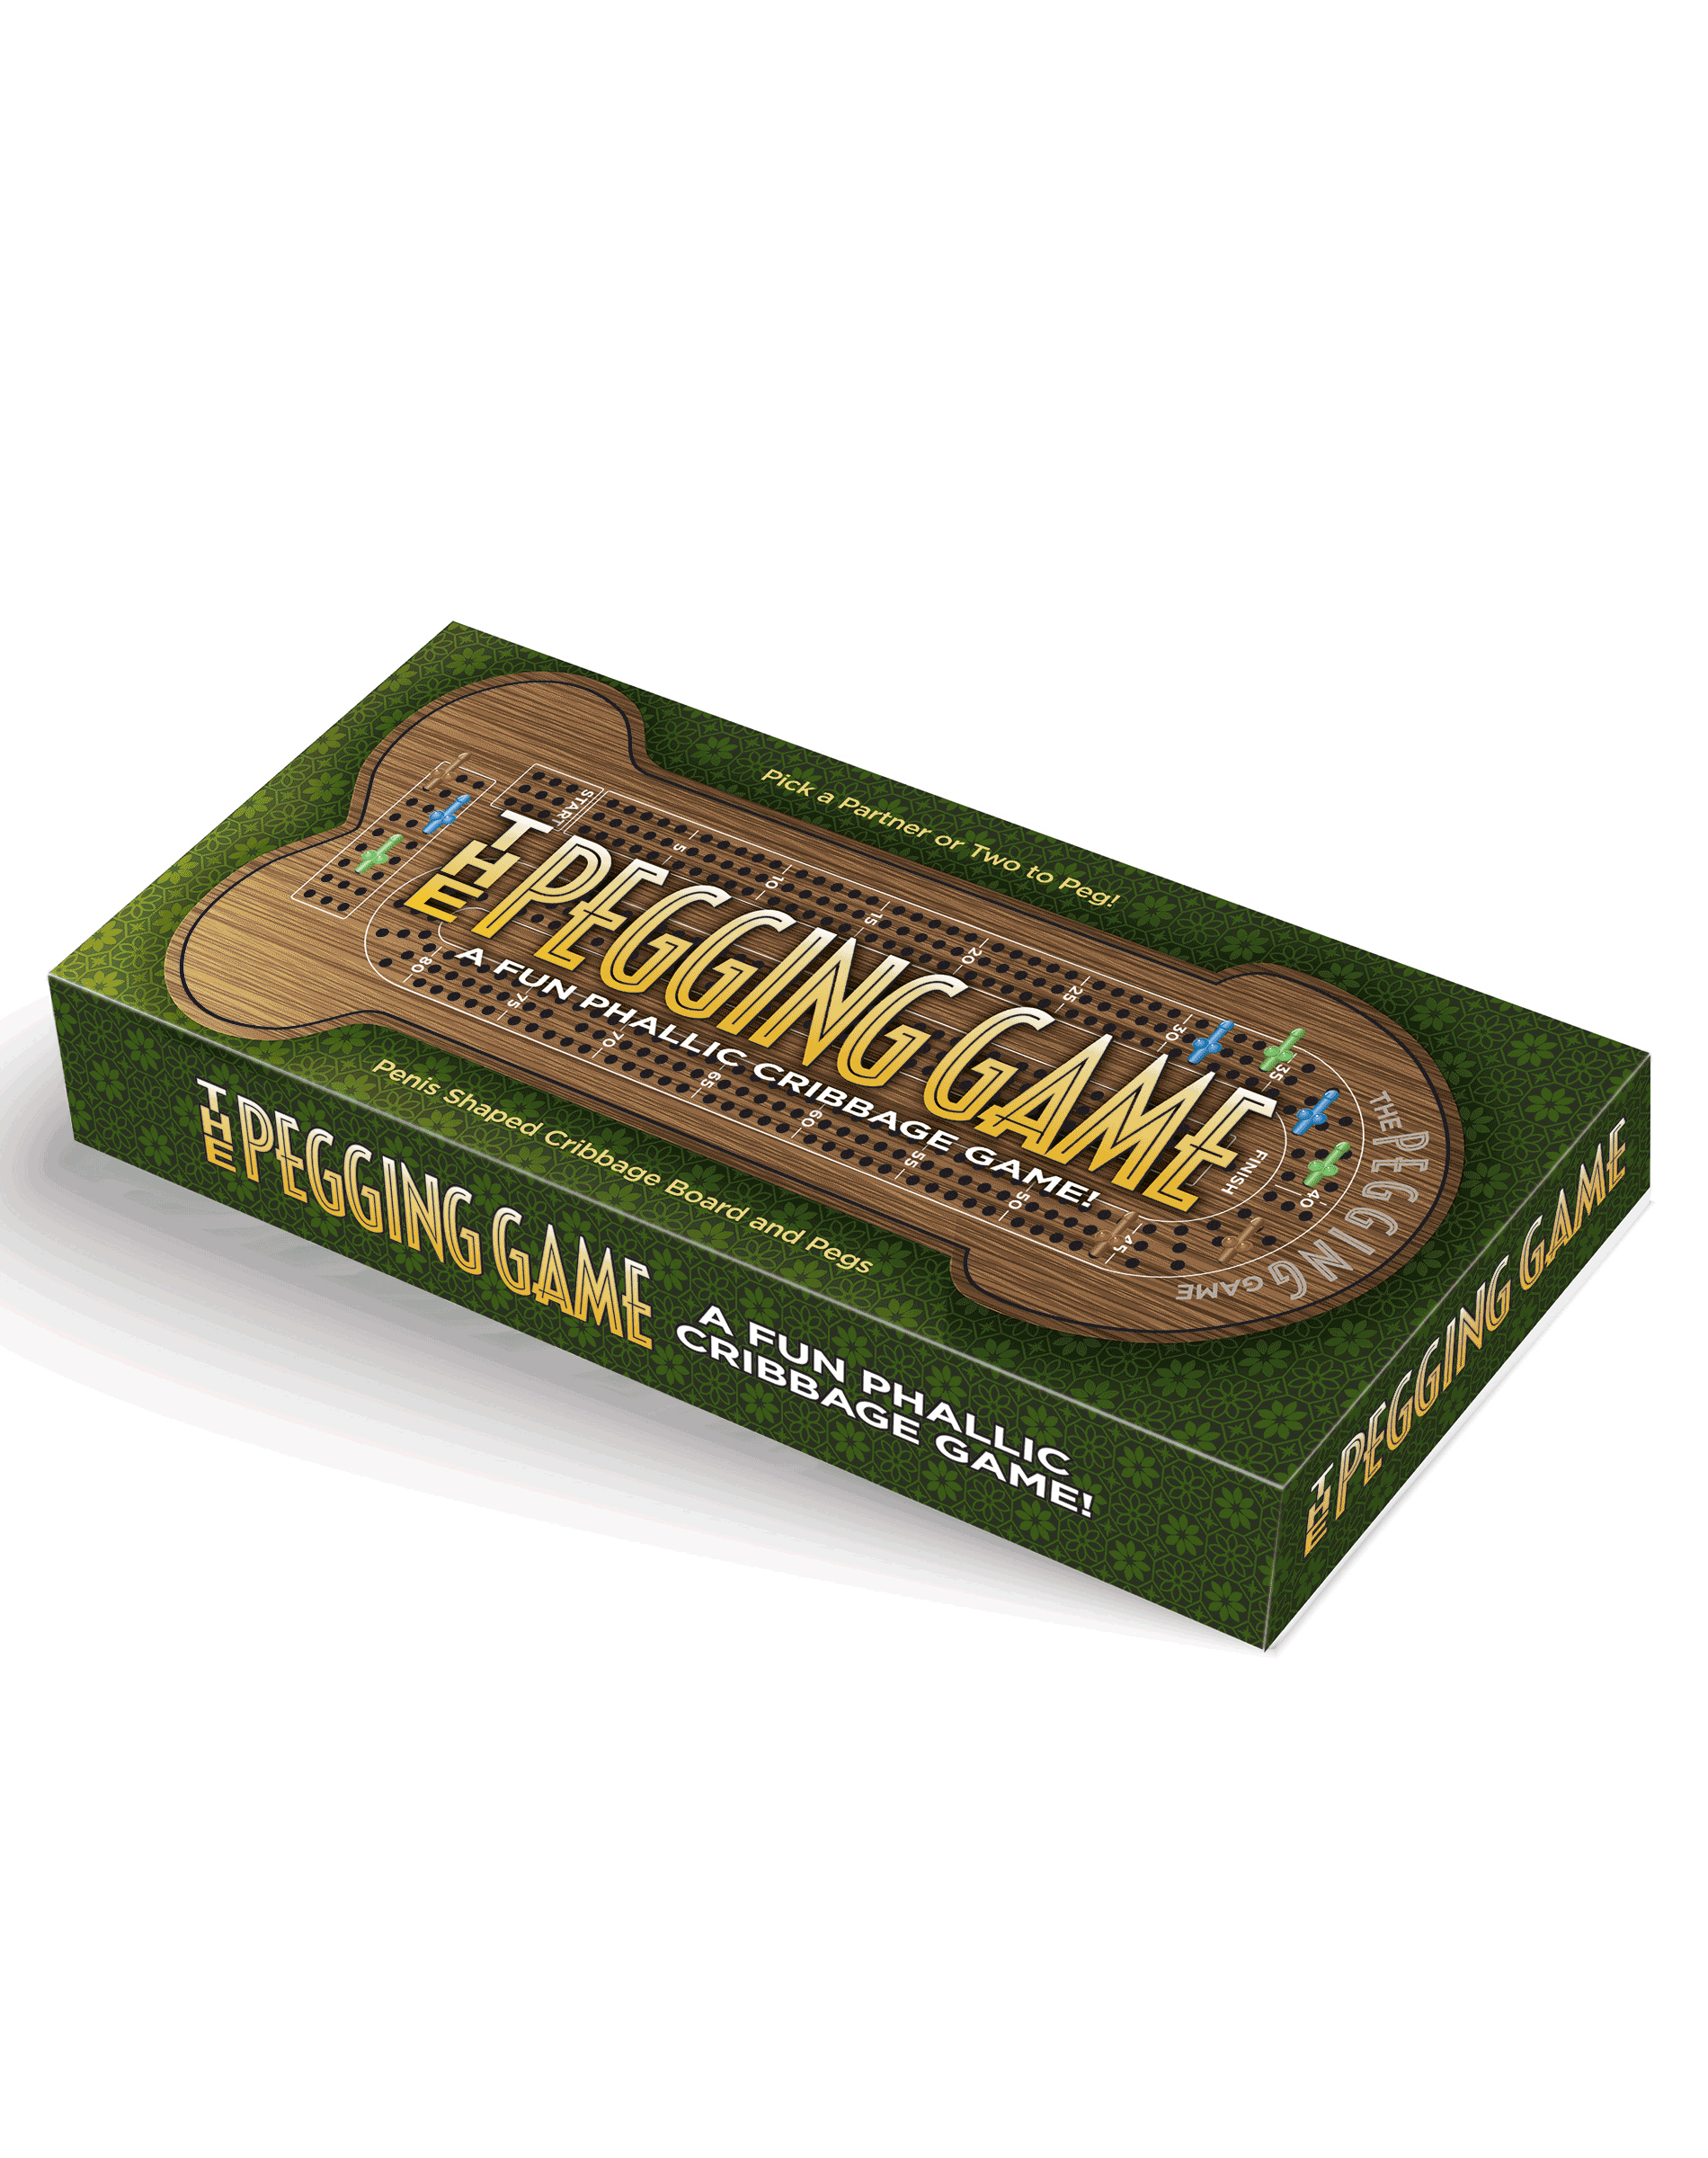 the pegging game cribbage only dirtier 